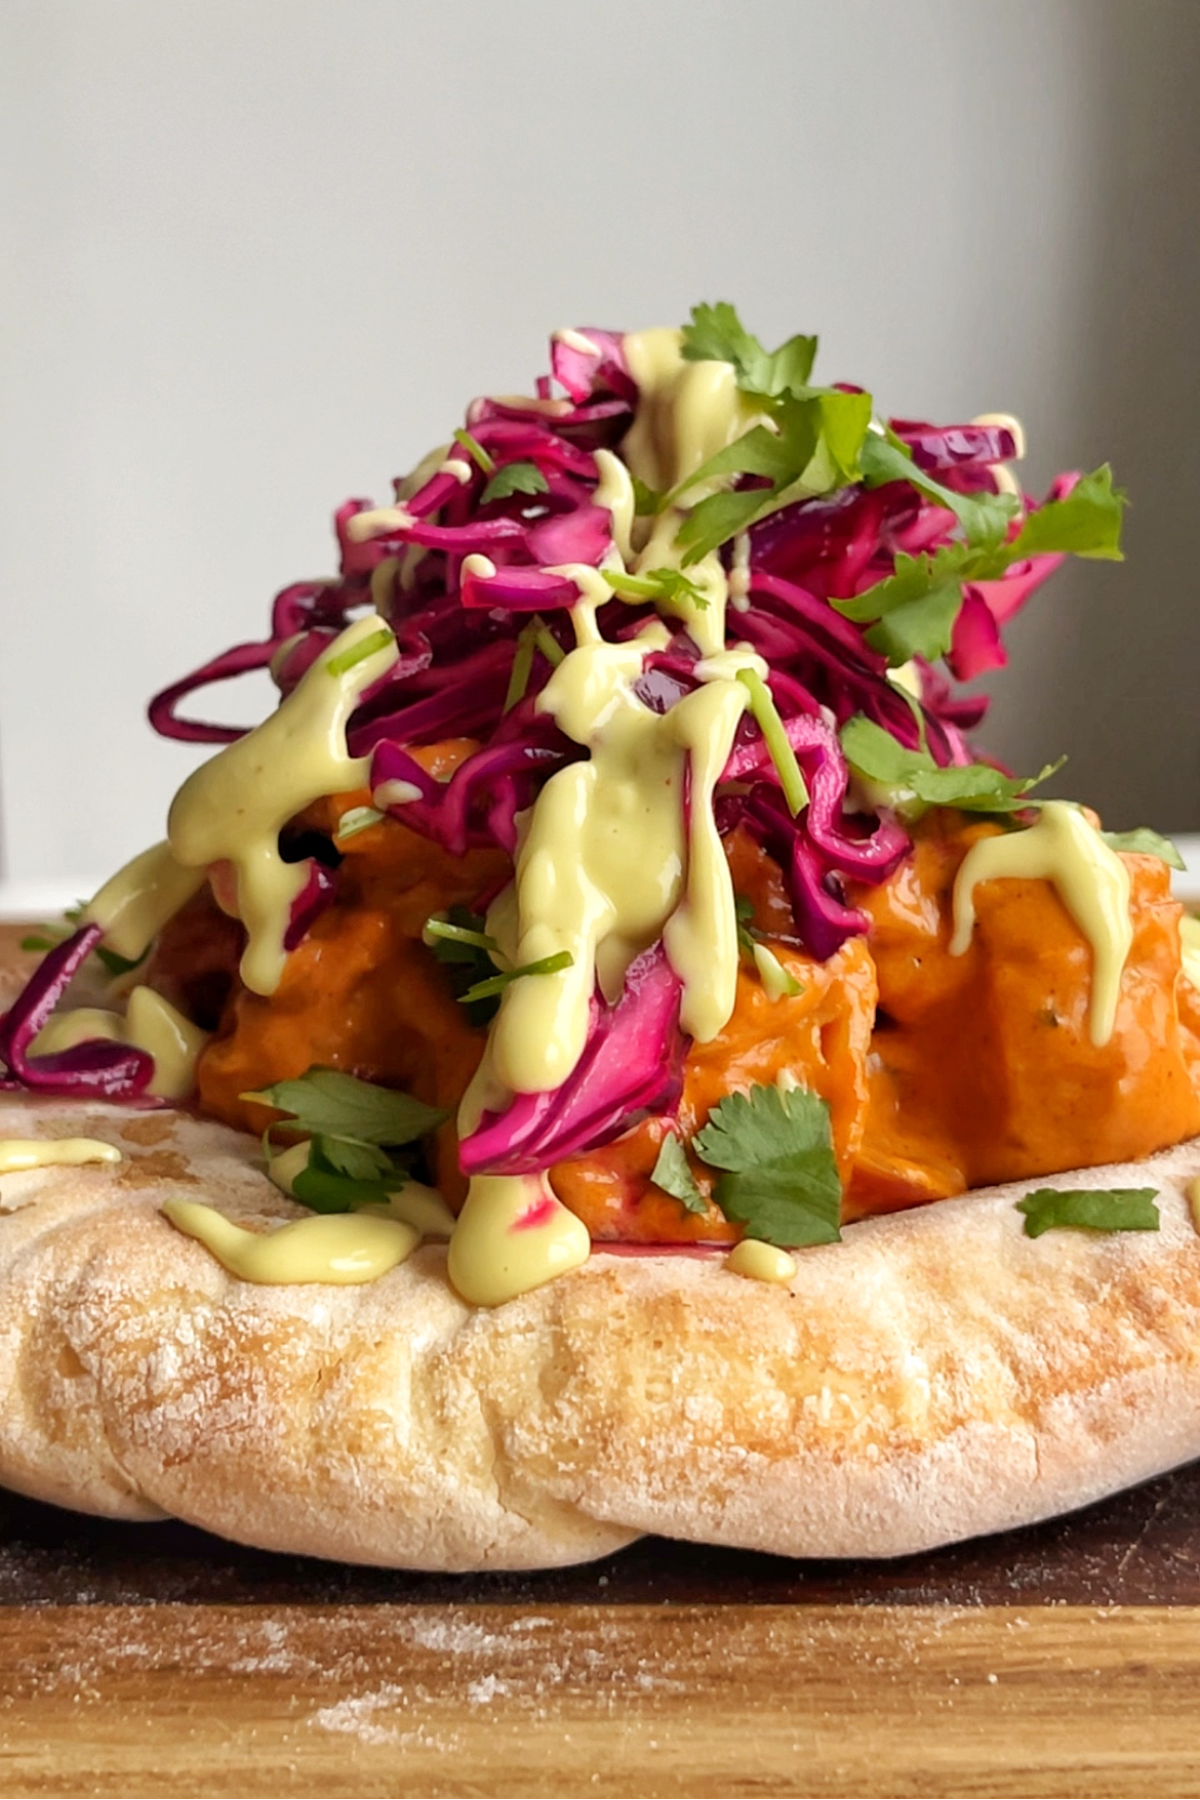 naan bread topped with butter curry, red cabbage, coriander, and avocado drizzle.